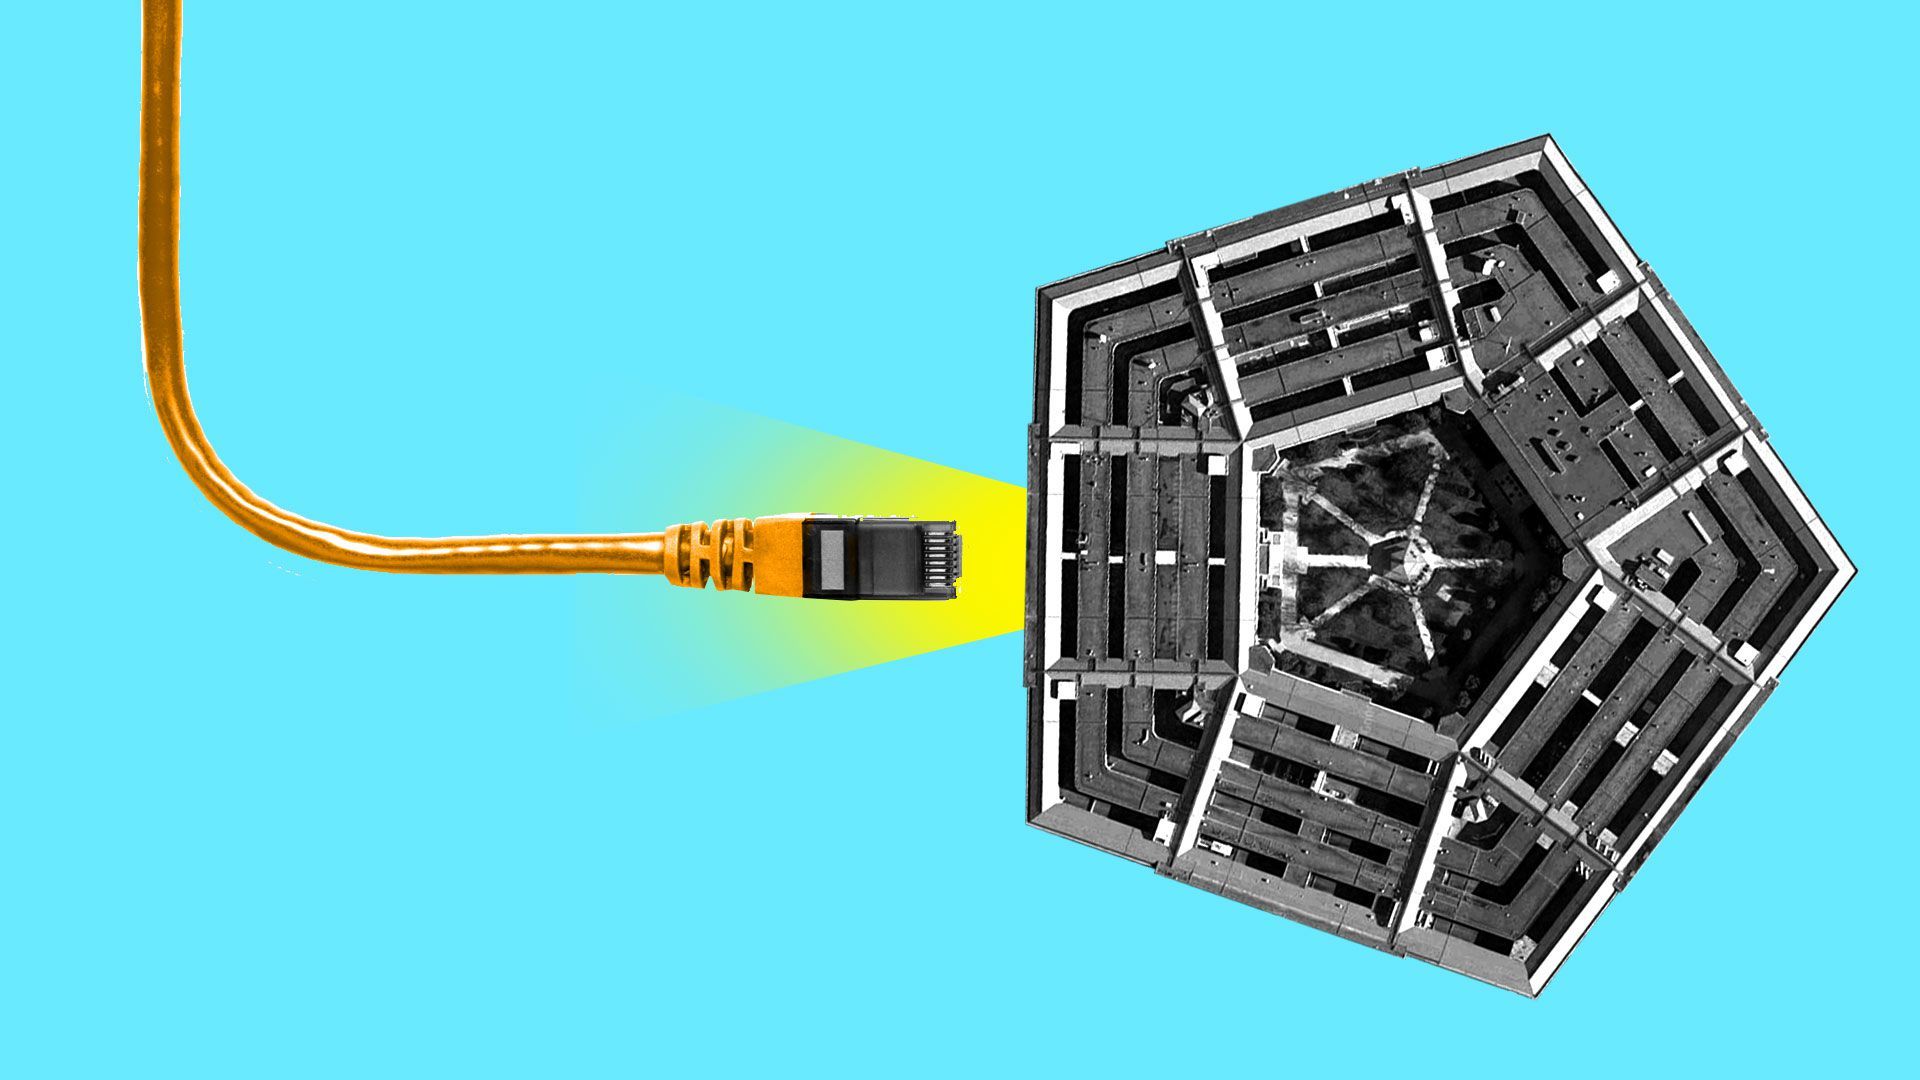 In this illustration, an electric plug enters the Pentagon